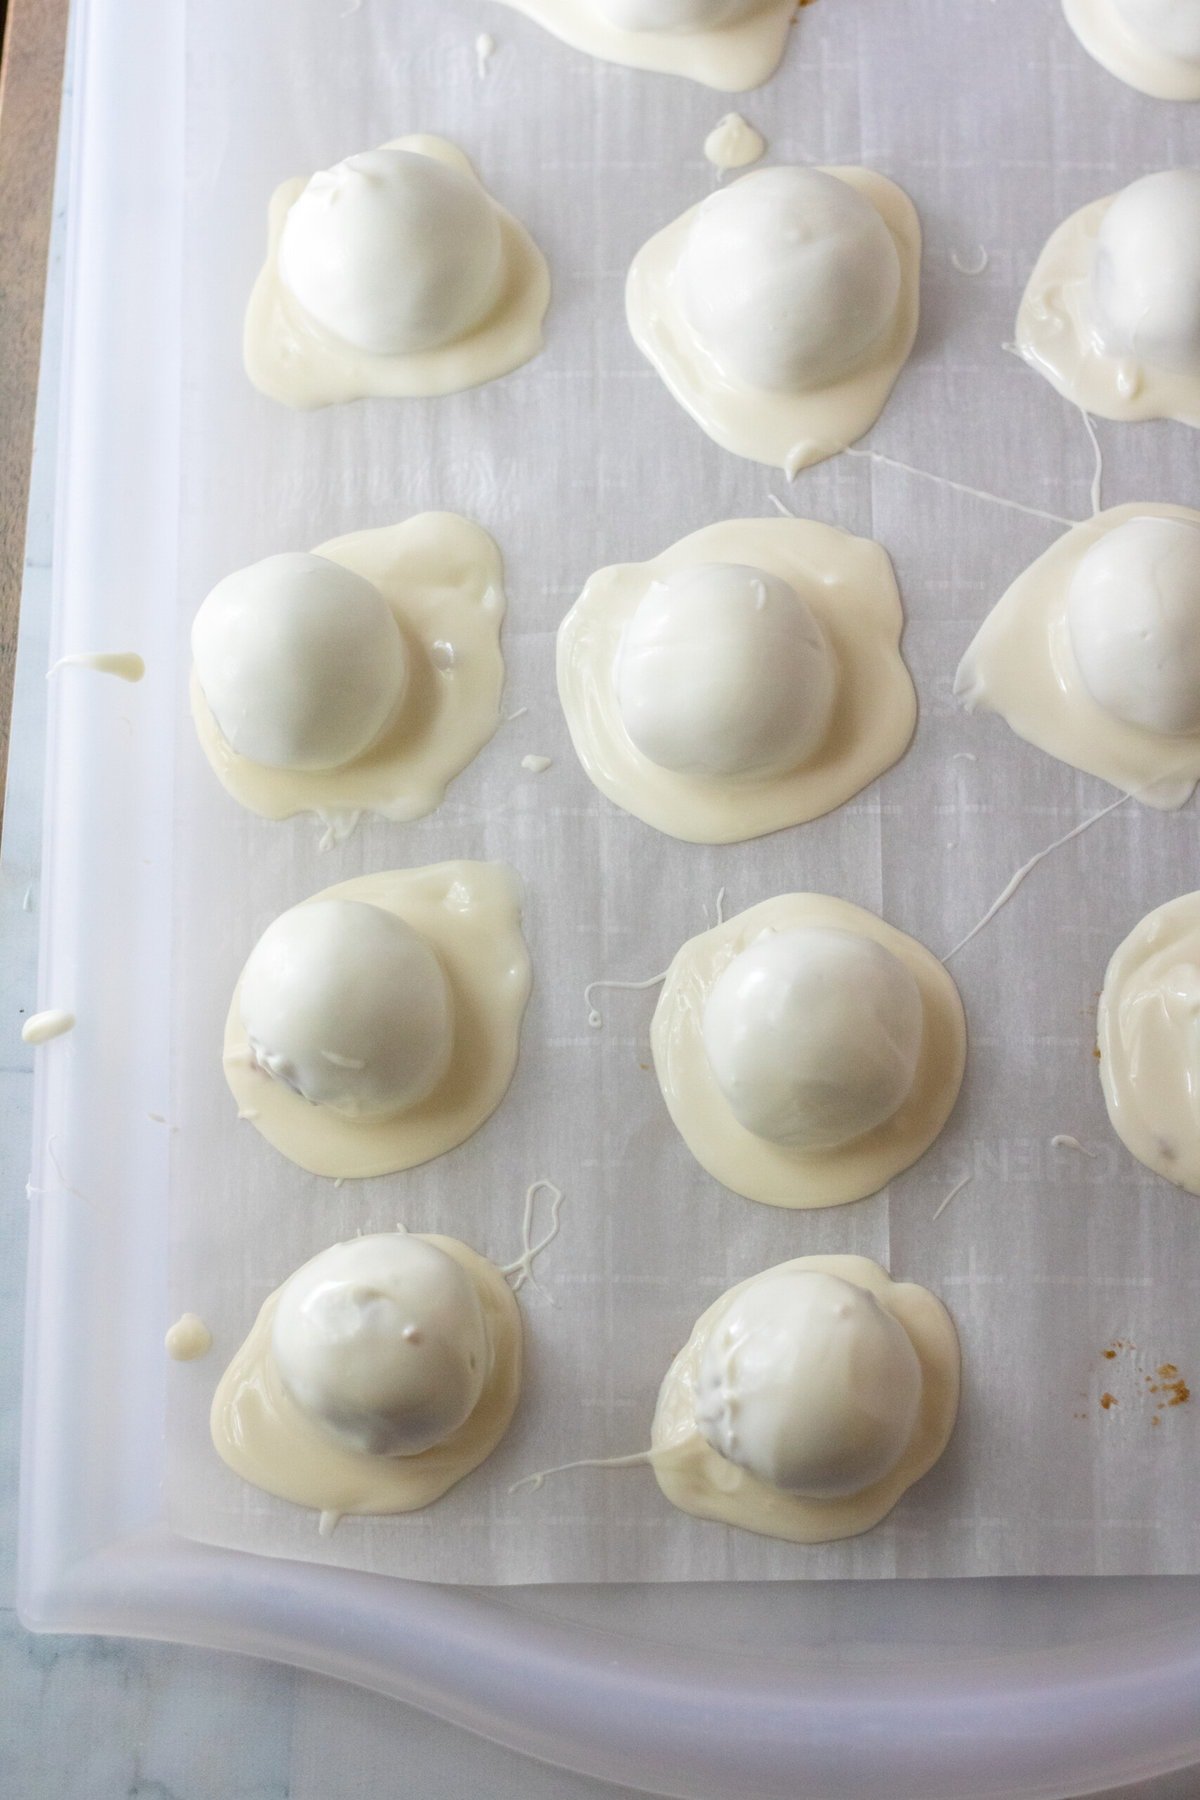 Coating the Snowman Truffles in white chocolate.